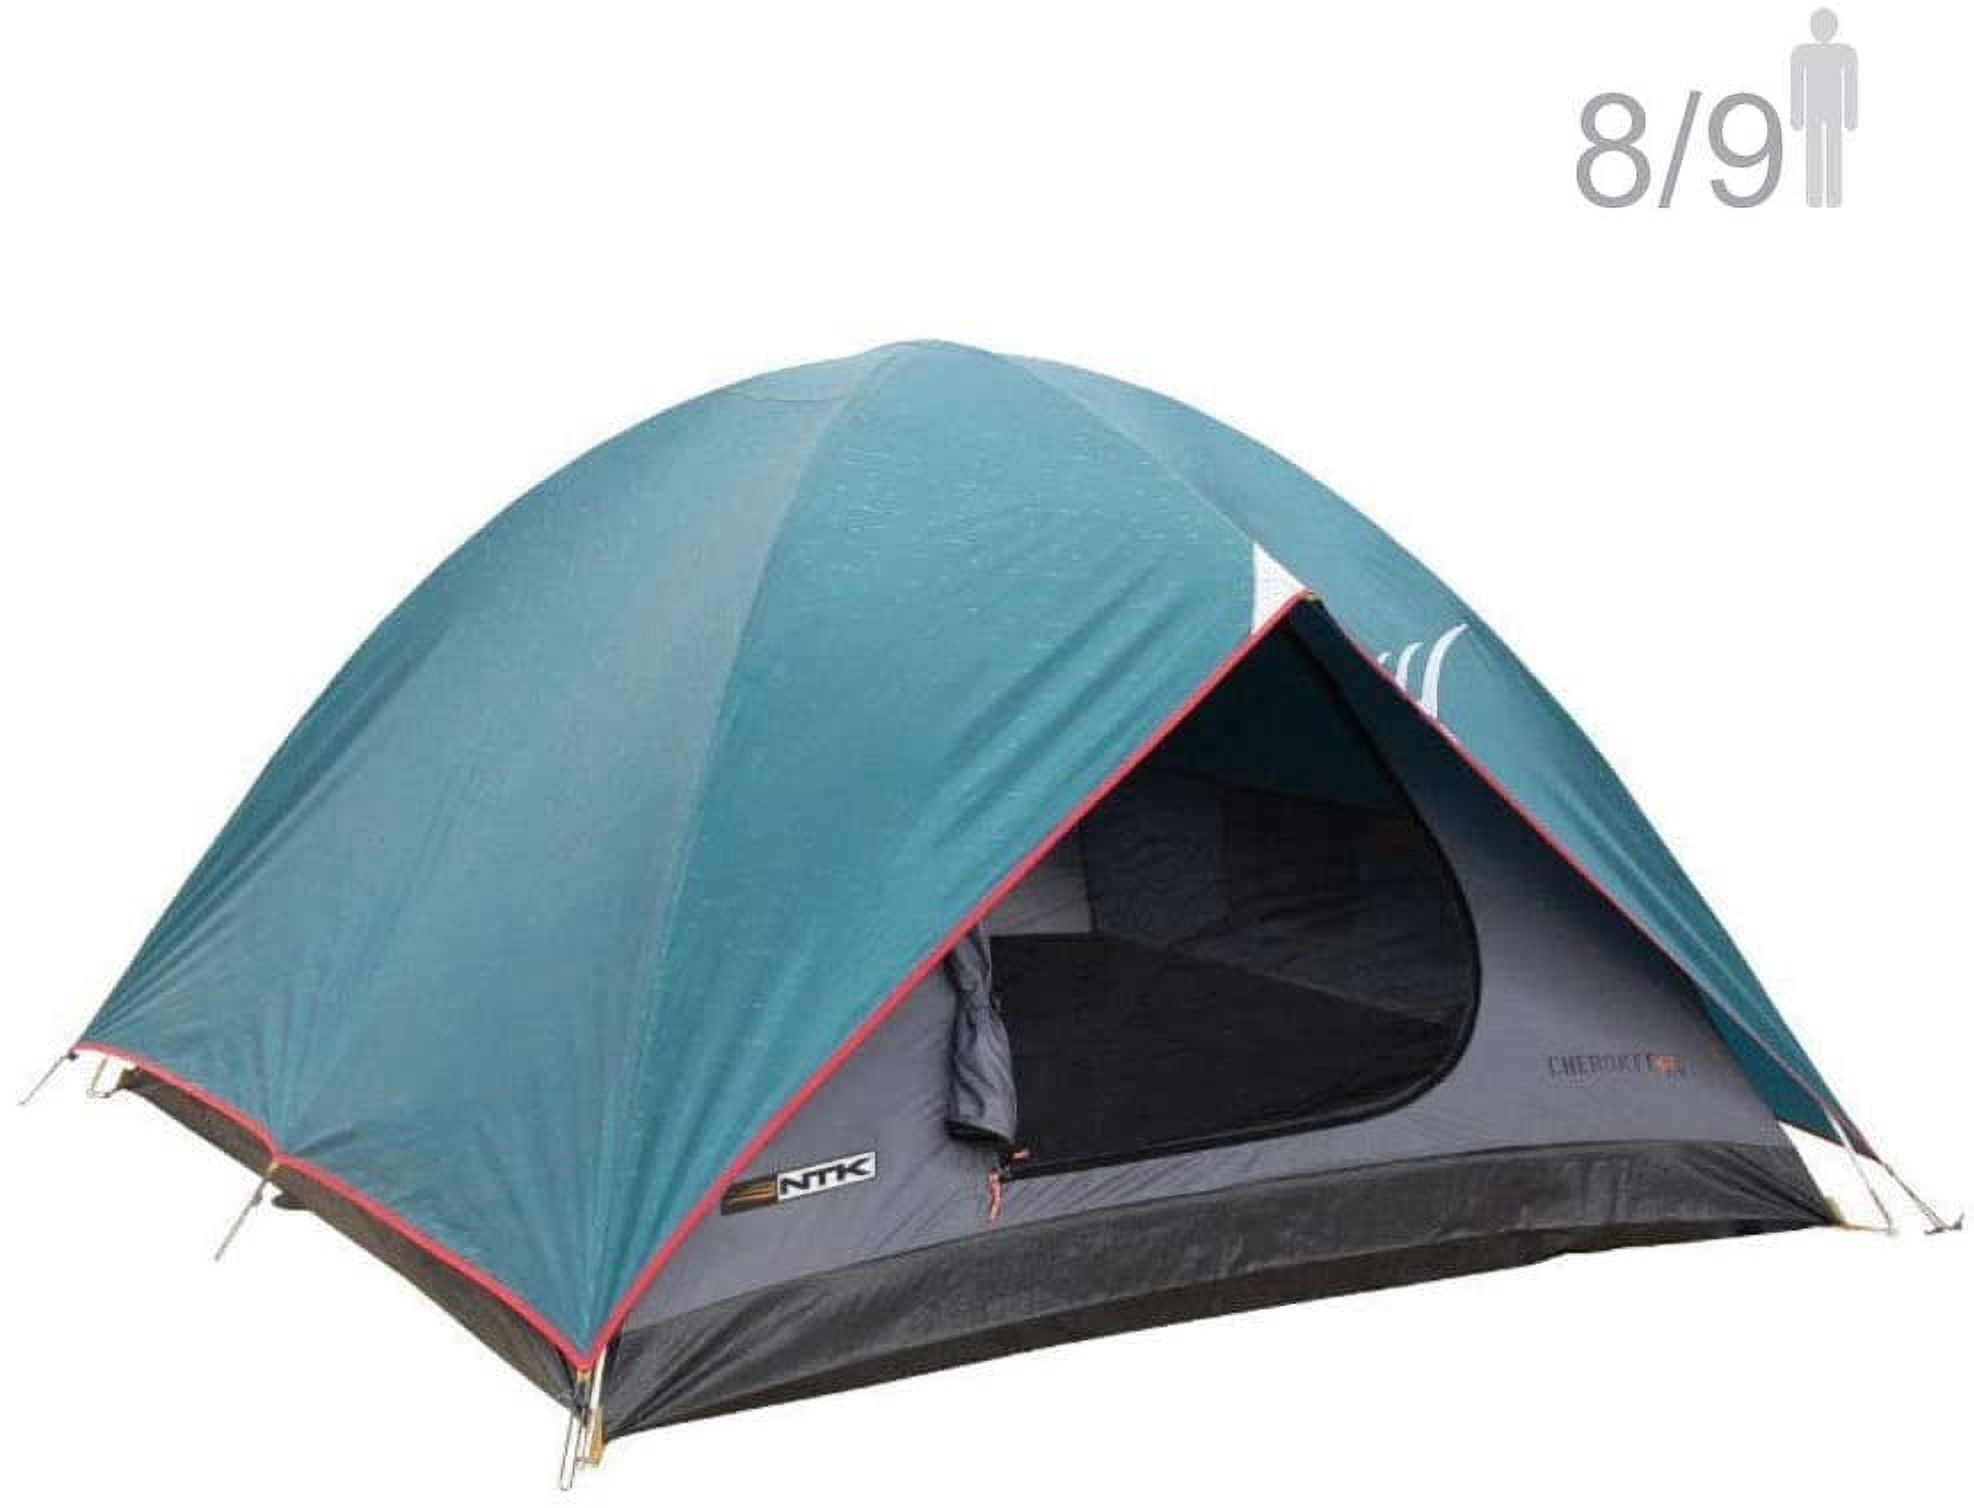 NTK Cherokee GT 8 to 9 Person 10 by 12 Foot Outdoor Dome Family Camping Tent 100% Waterproof 2500mm - image 1 of 9